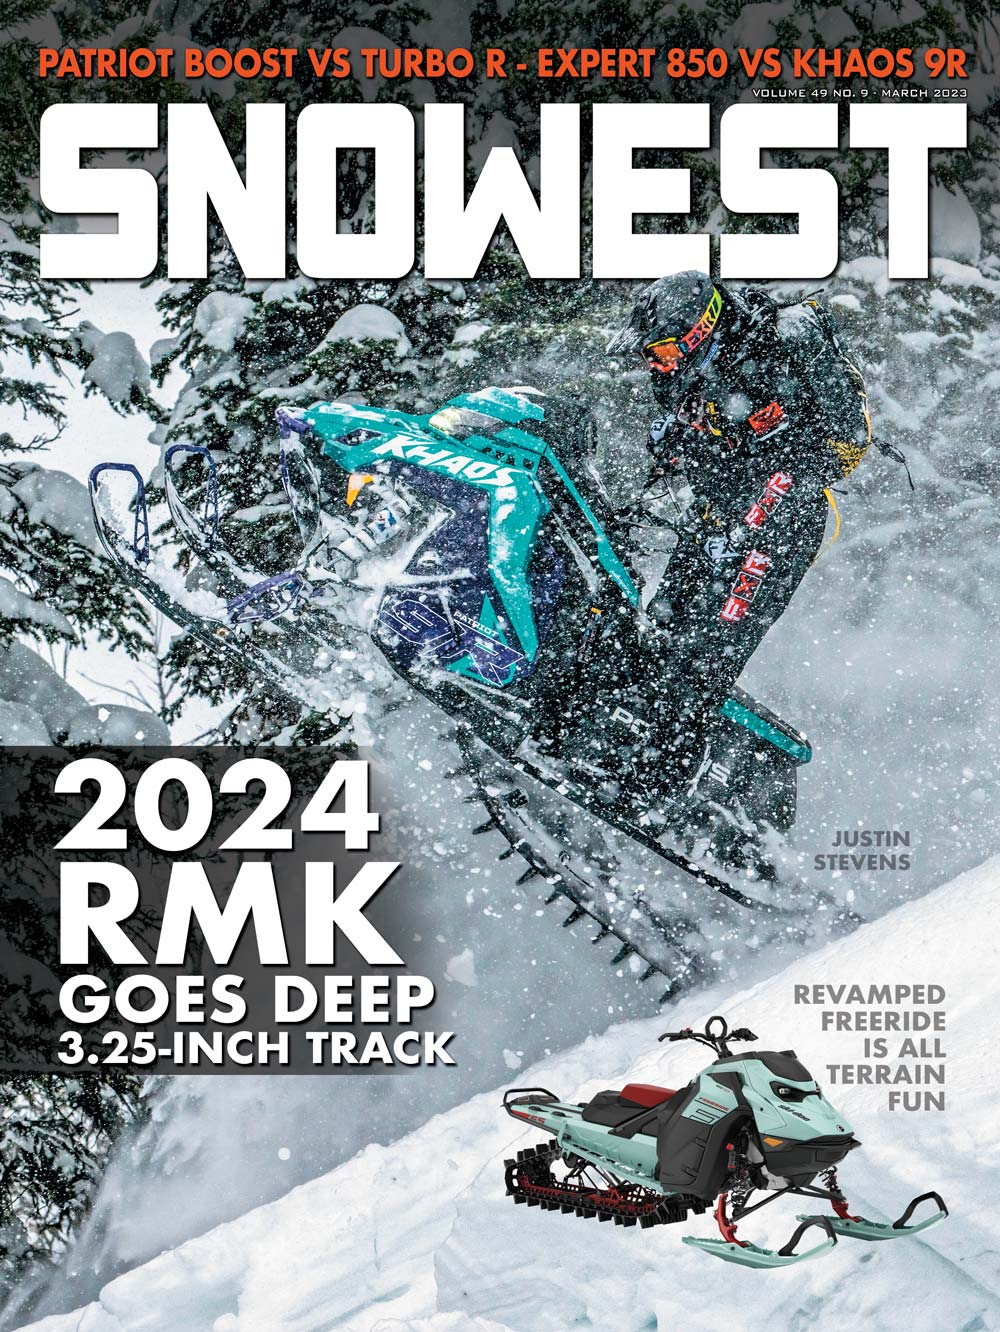 SnoWest March 2023 cover